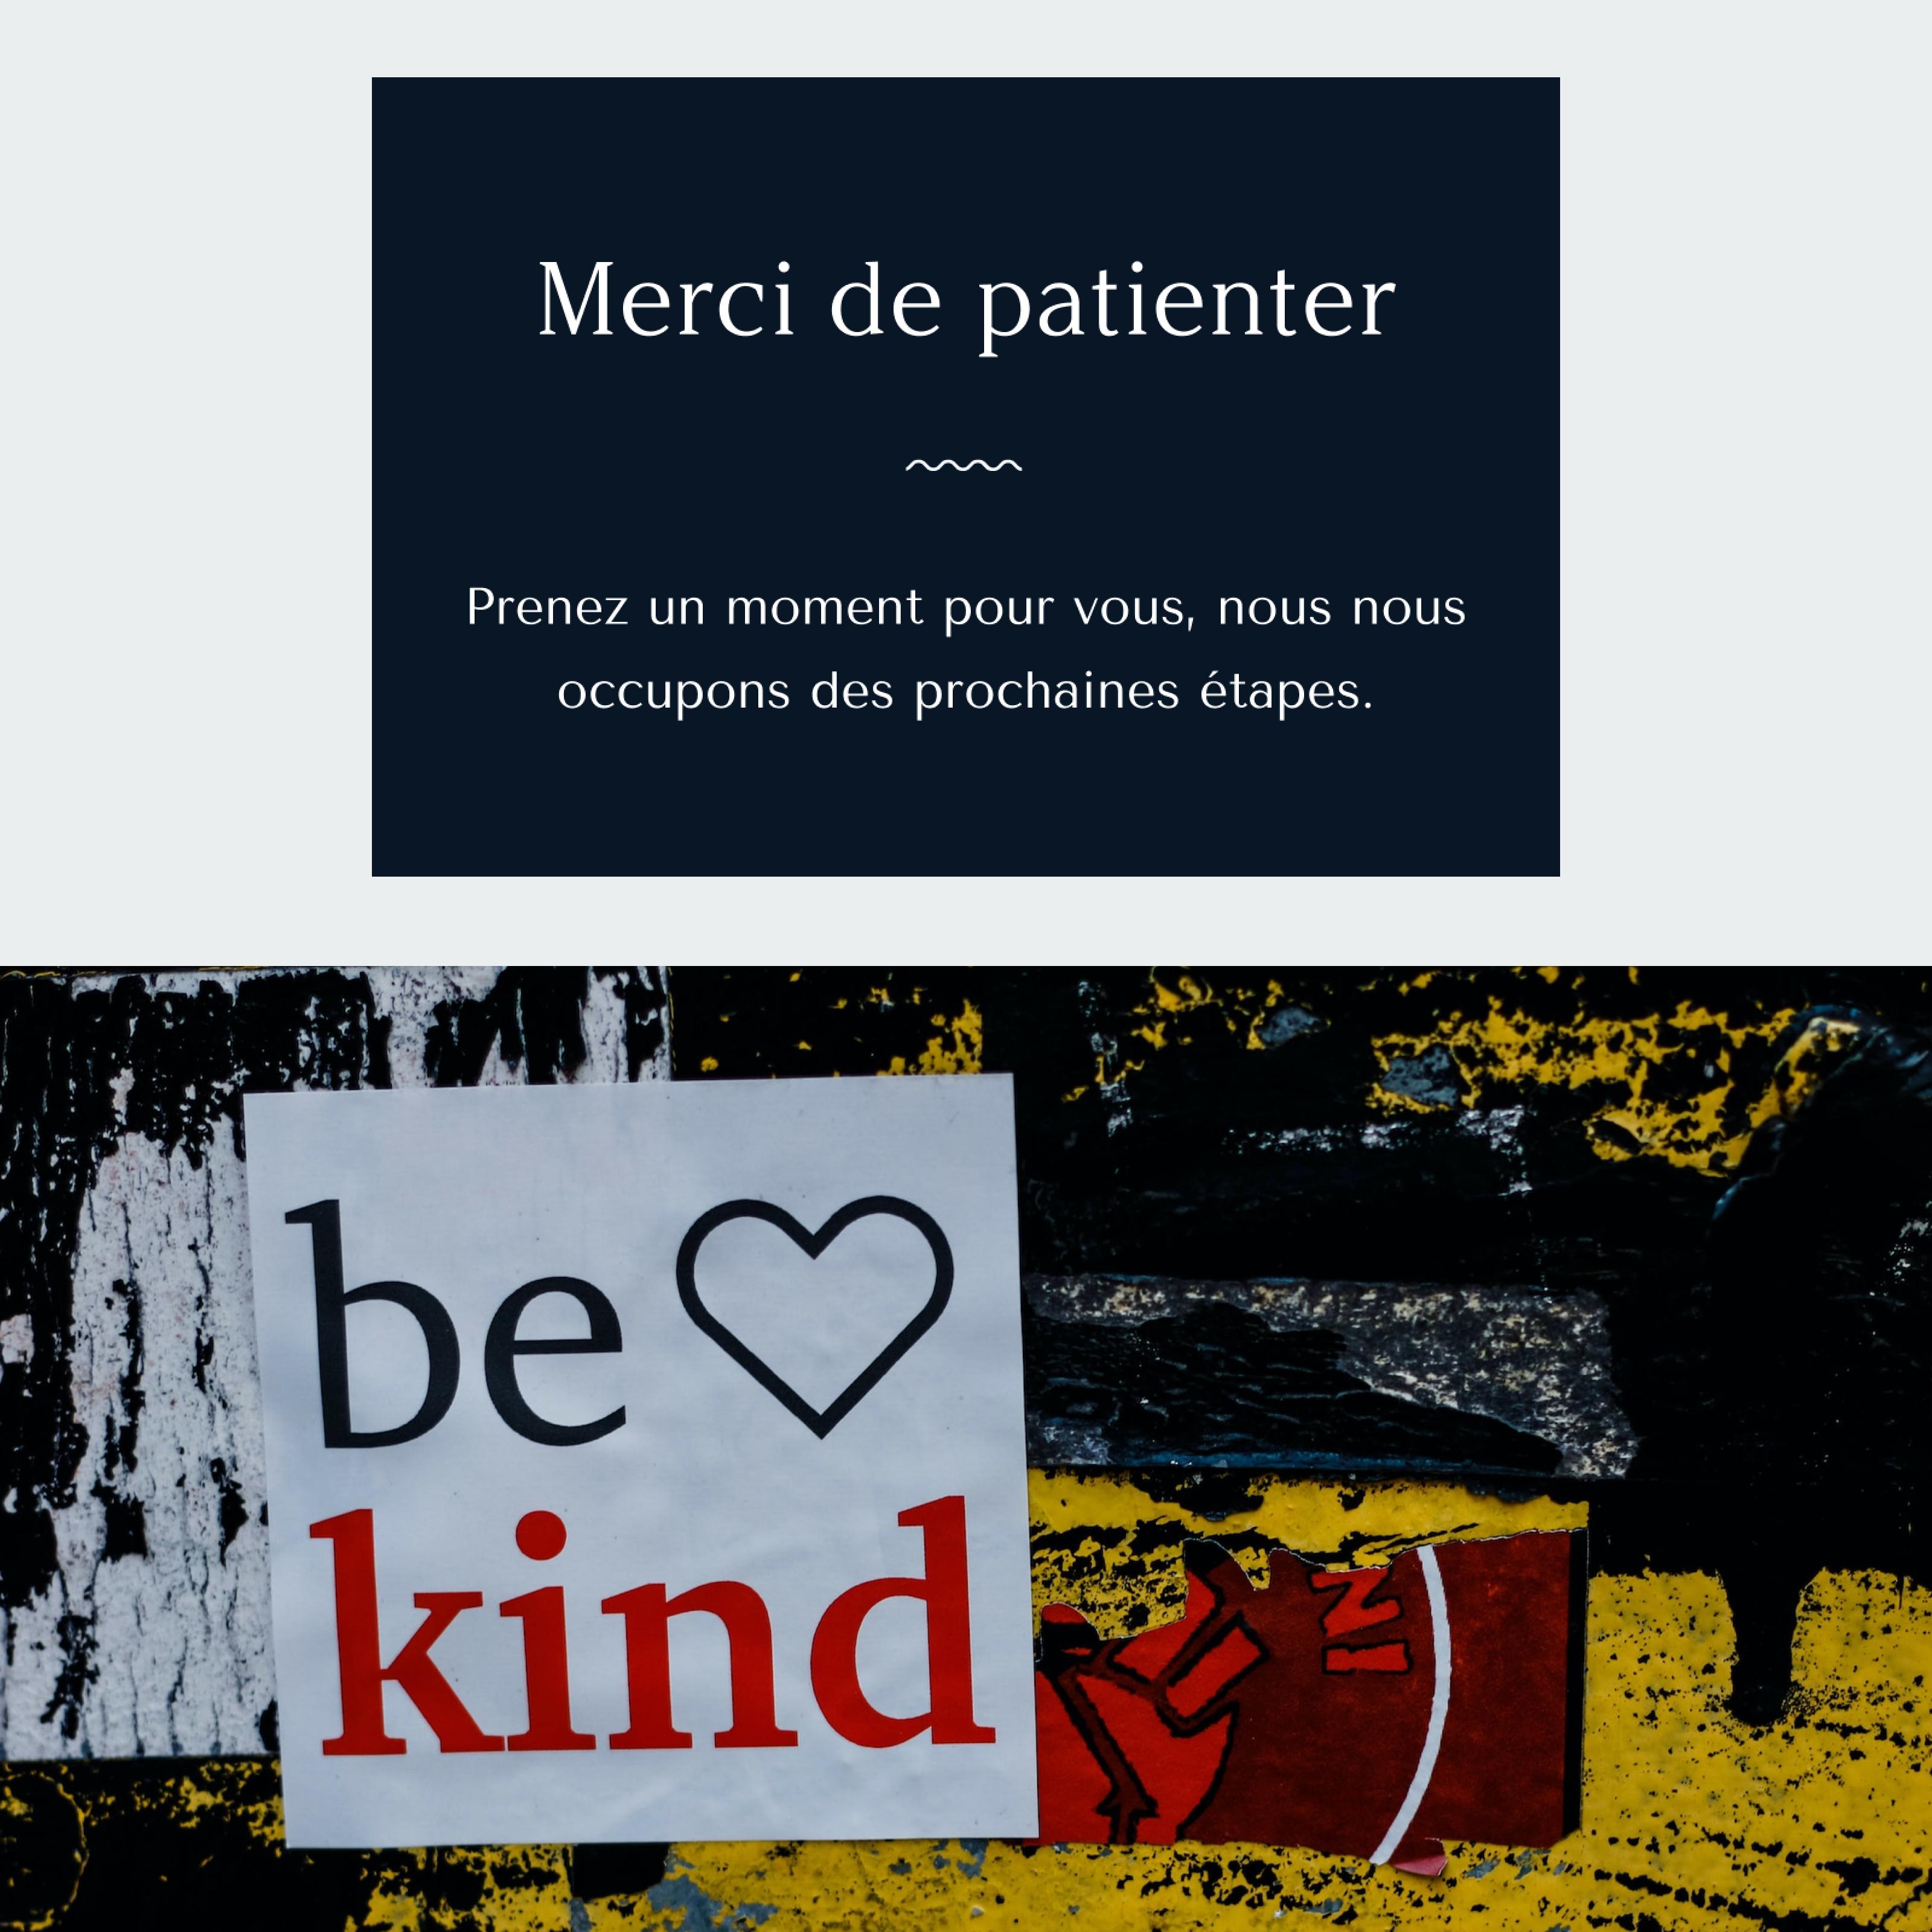 examples of ui and a "be kind" poster